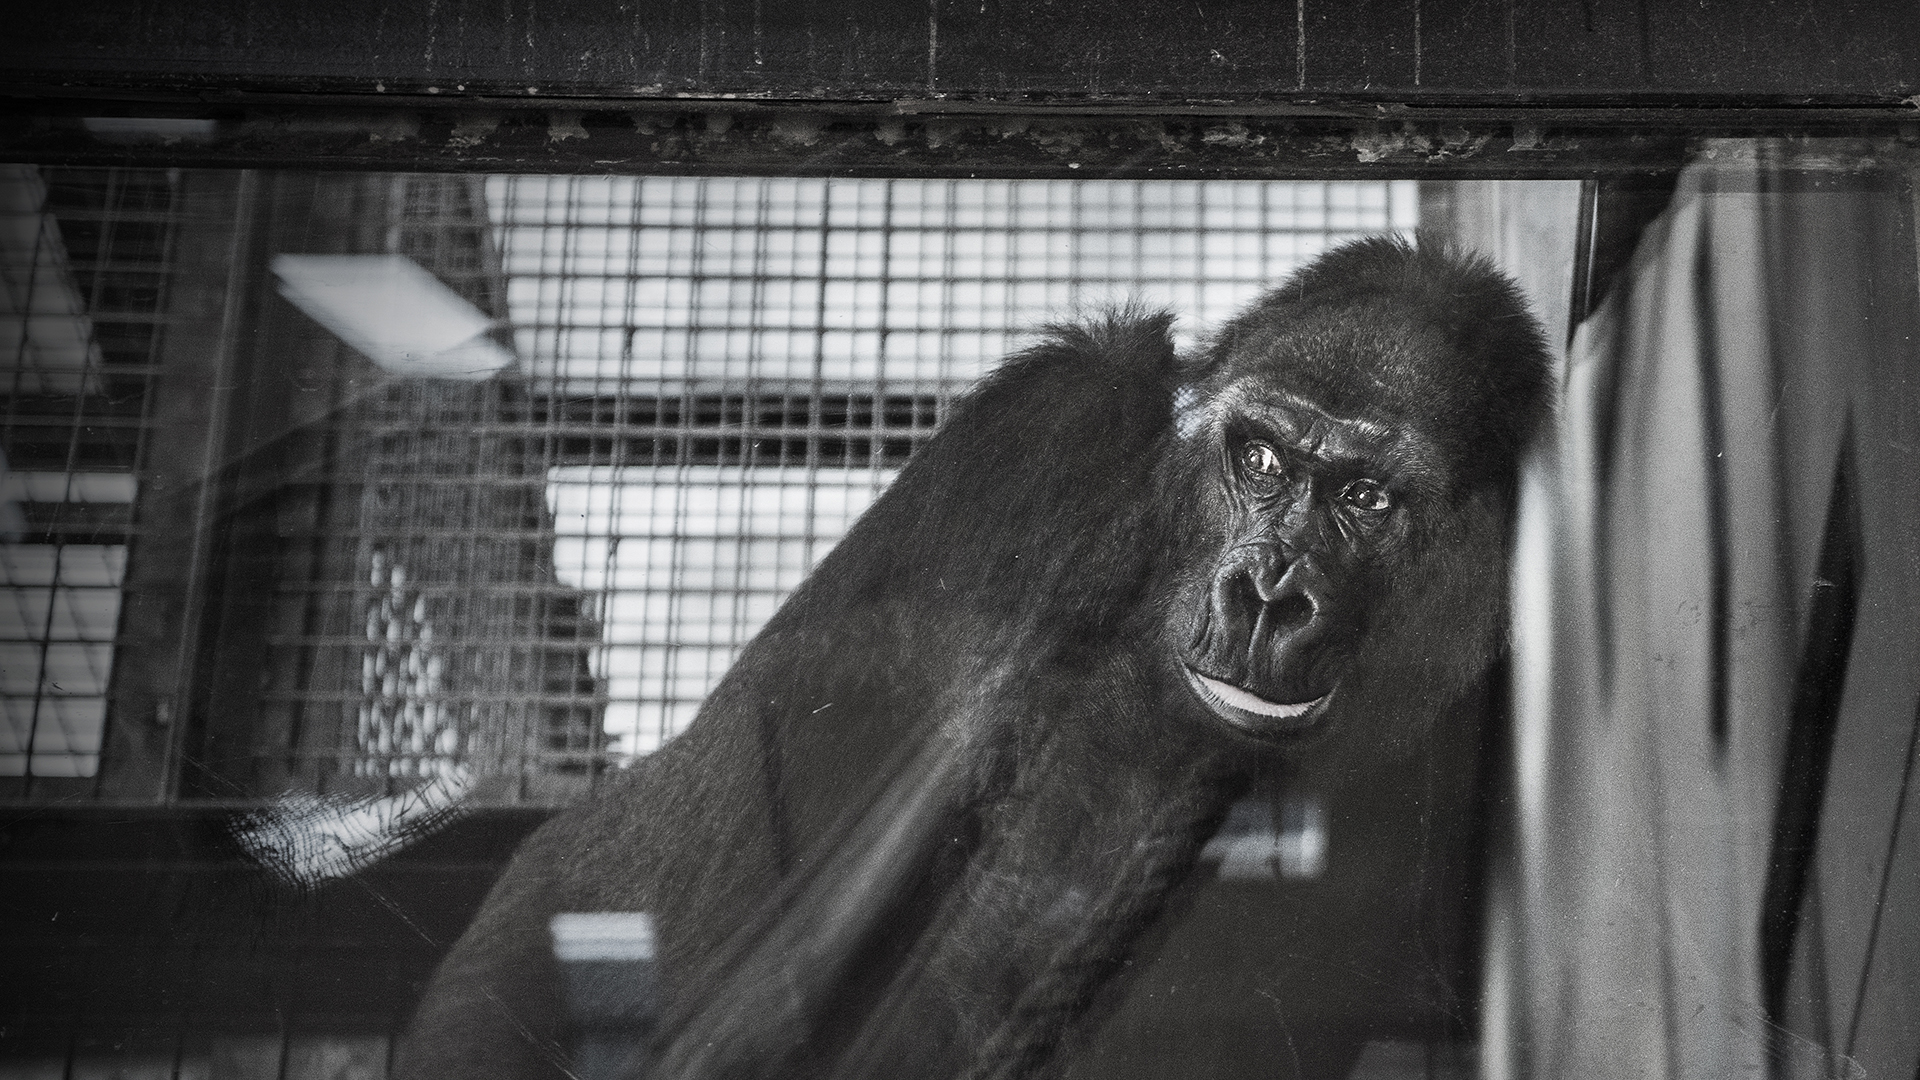 A black and white photo of a gorilla leaning against a glass window, with cage bars in the background